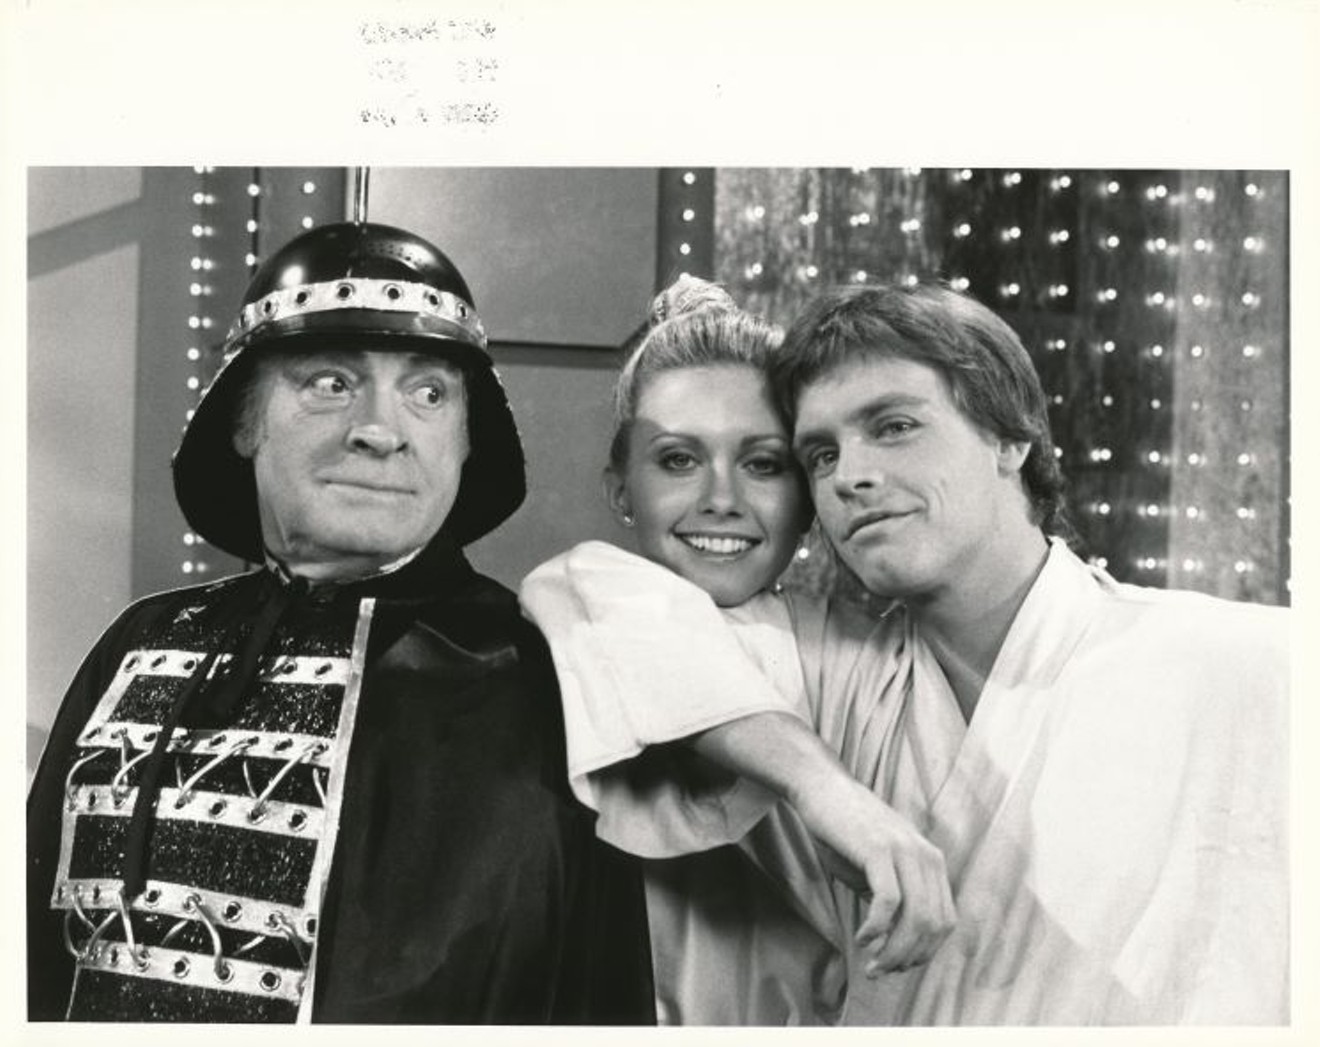 Star Wars cast member Mark Hamill, right, plays himself in a parody sketch on The Bob Hope Christmas Special in 1977, with Bob Hope as "Barf Vader" and singer Olivia Newton John as Princess Hialeah.